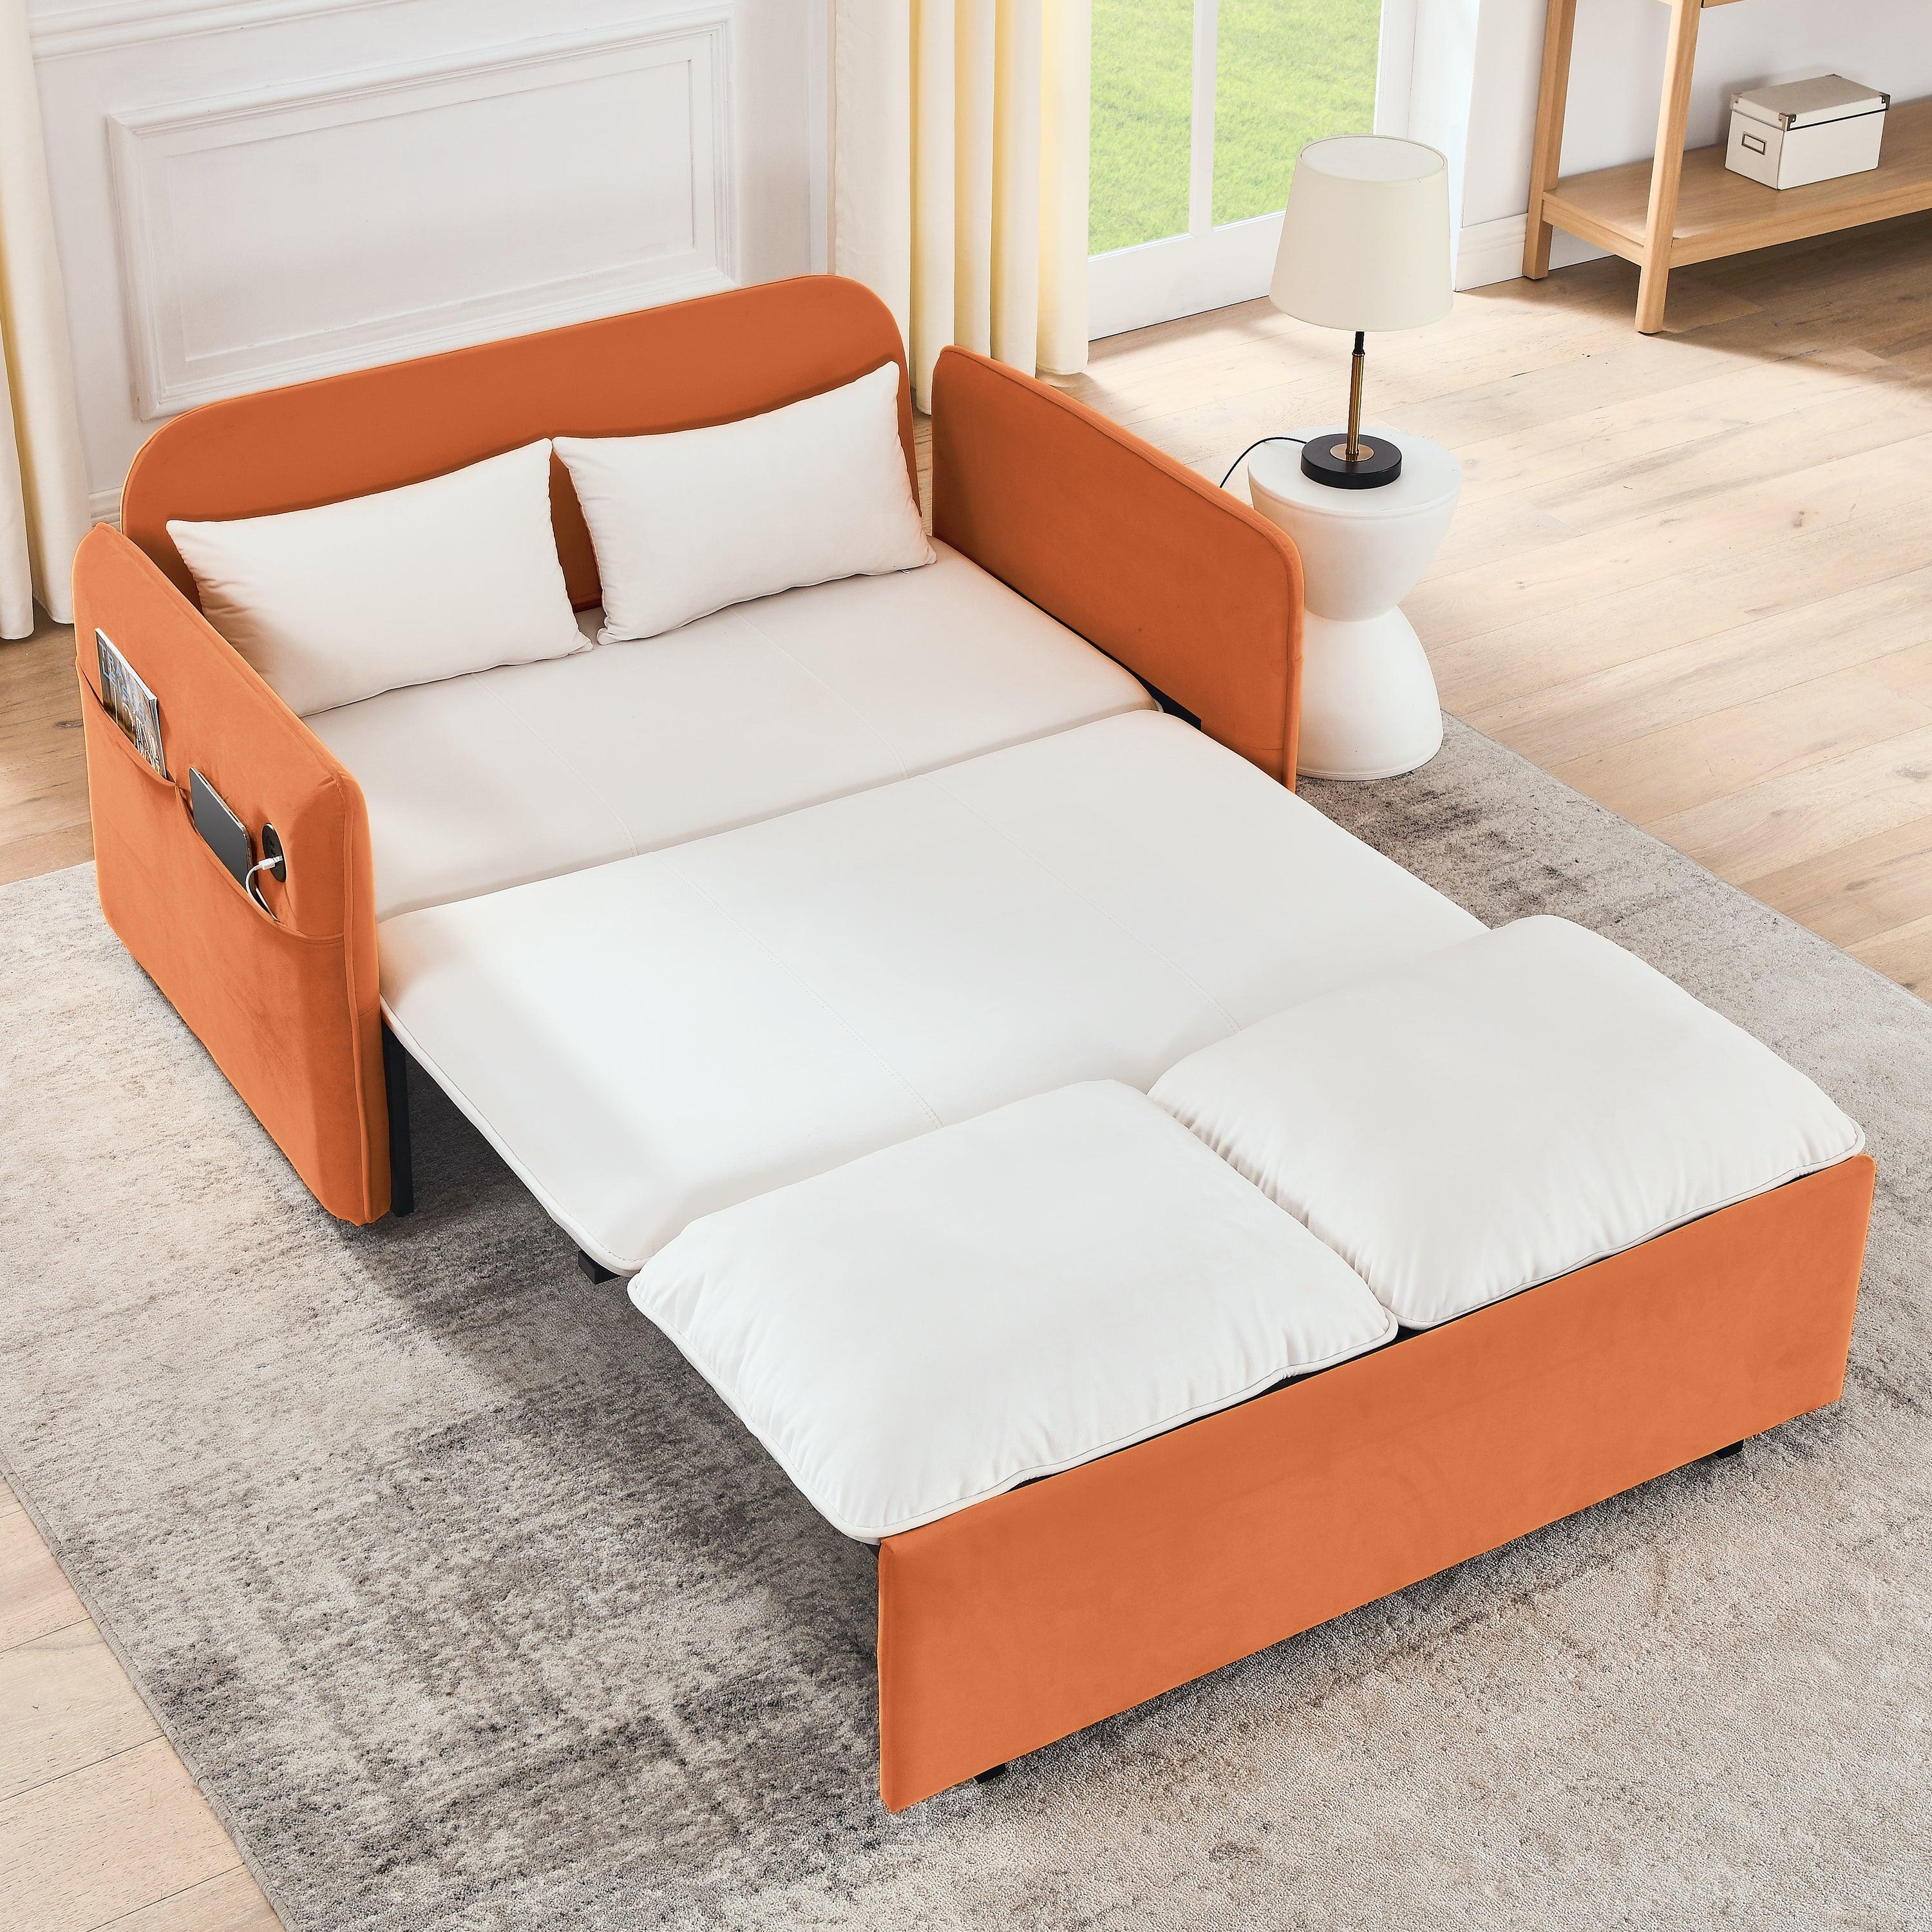 🆓🚛 53" Modern Convertible Sofa Bed W/2 Removable Armrests W/Usb Power Port, Velvet Recliner Adjustable Sofa W/Head Pull-Out Bed, 2 Pillows, for Living Room Apartment Etc., White-Orange